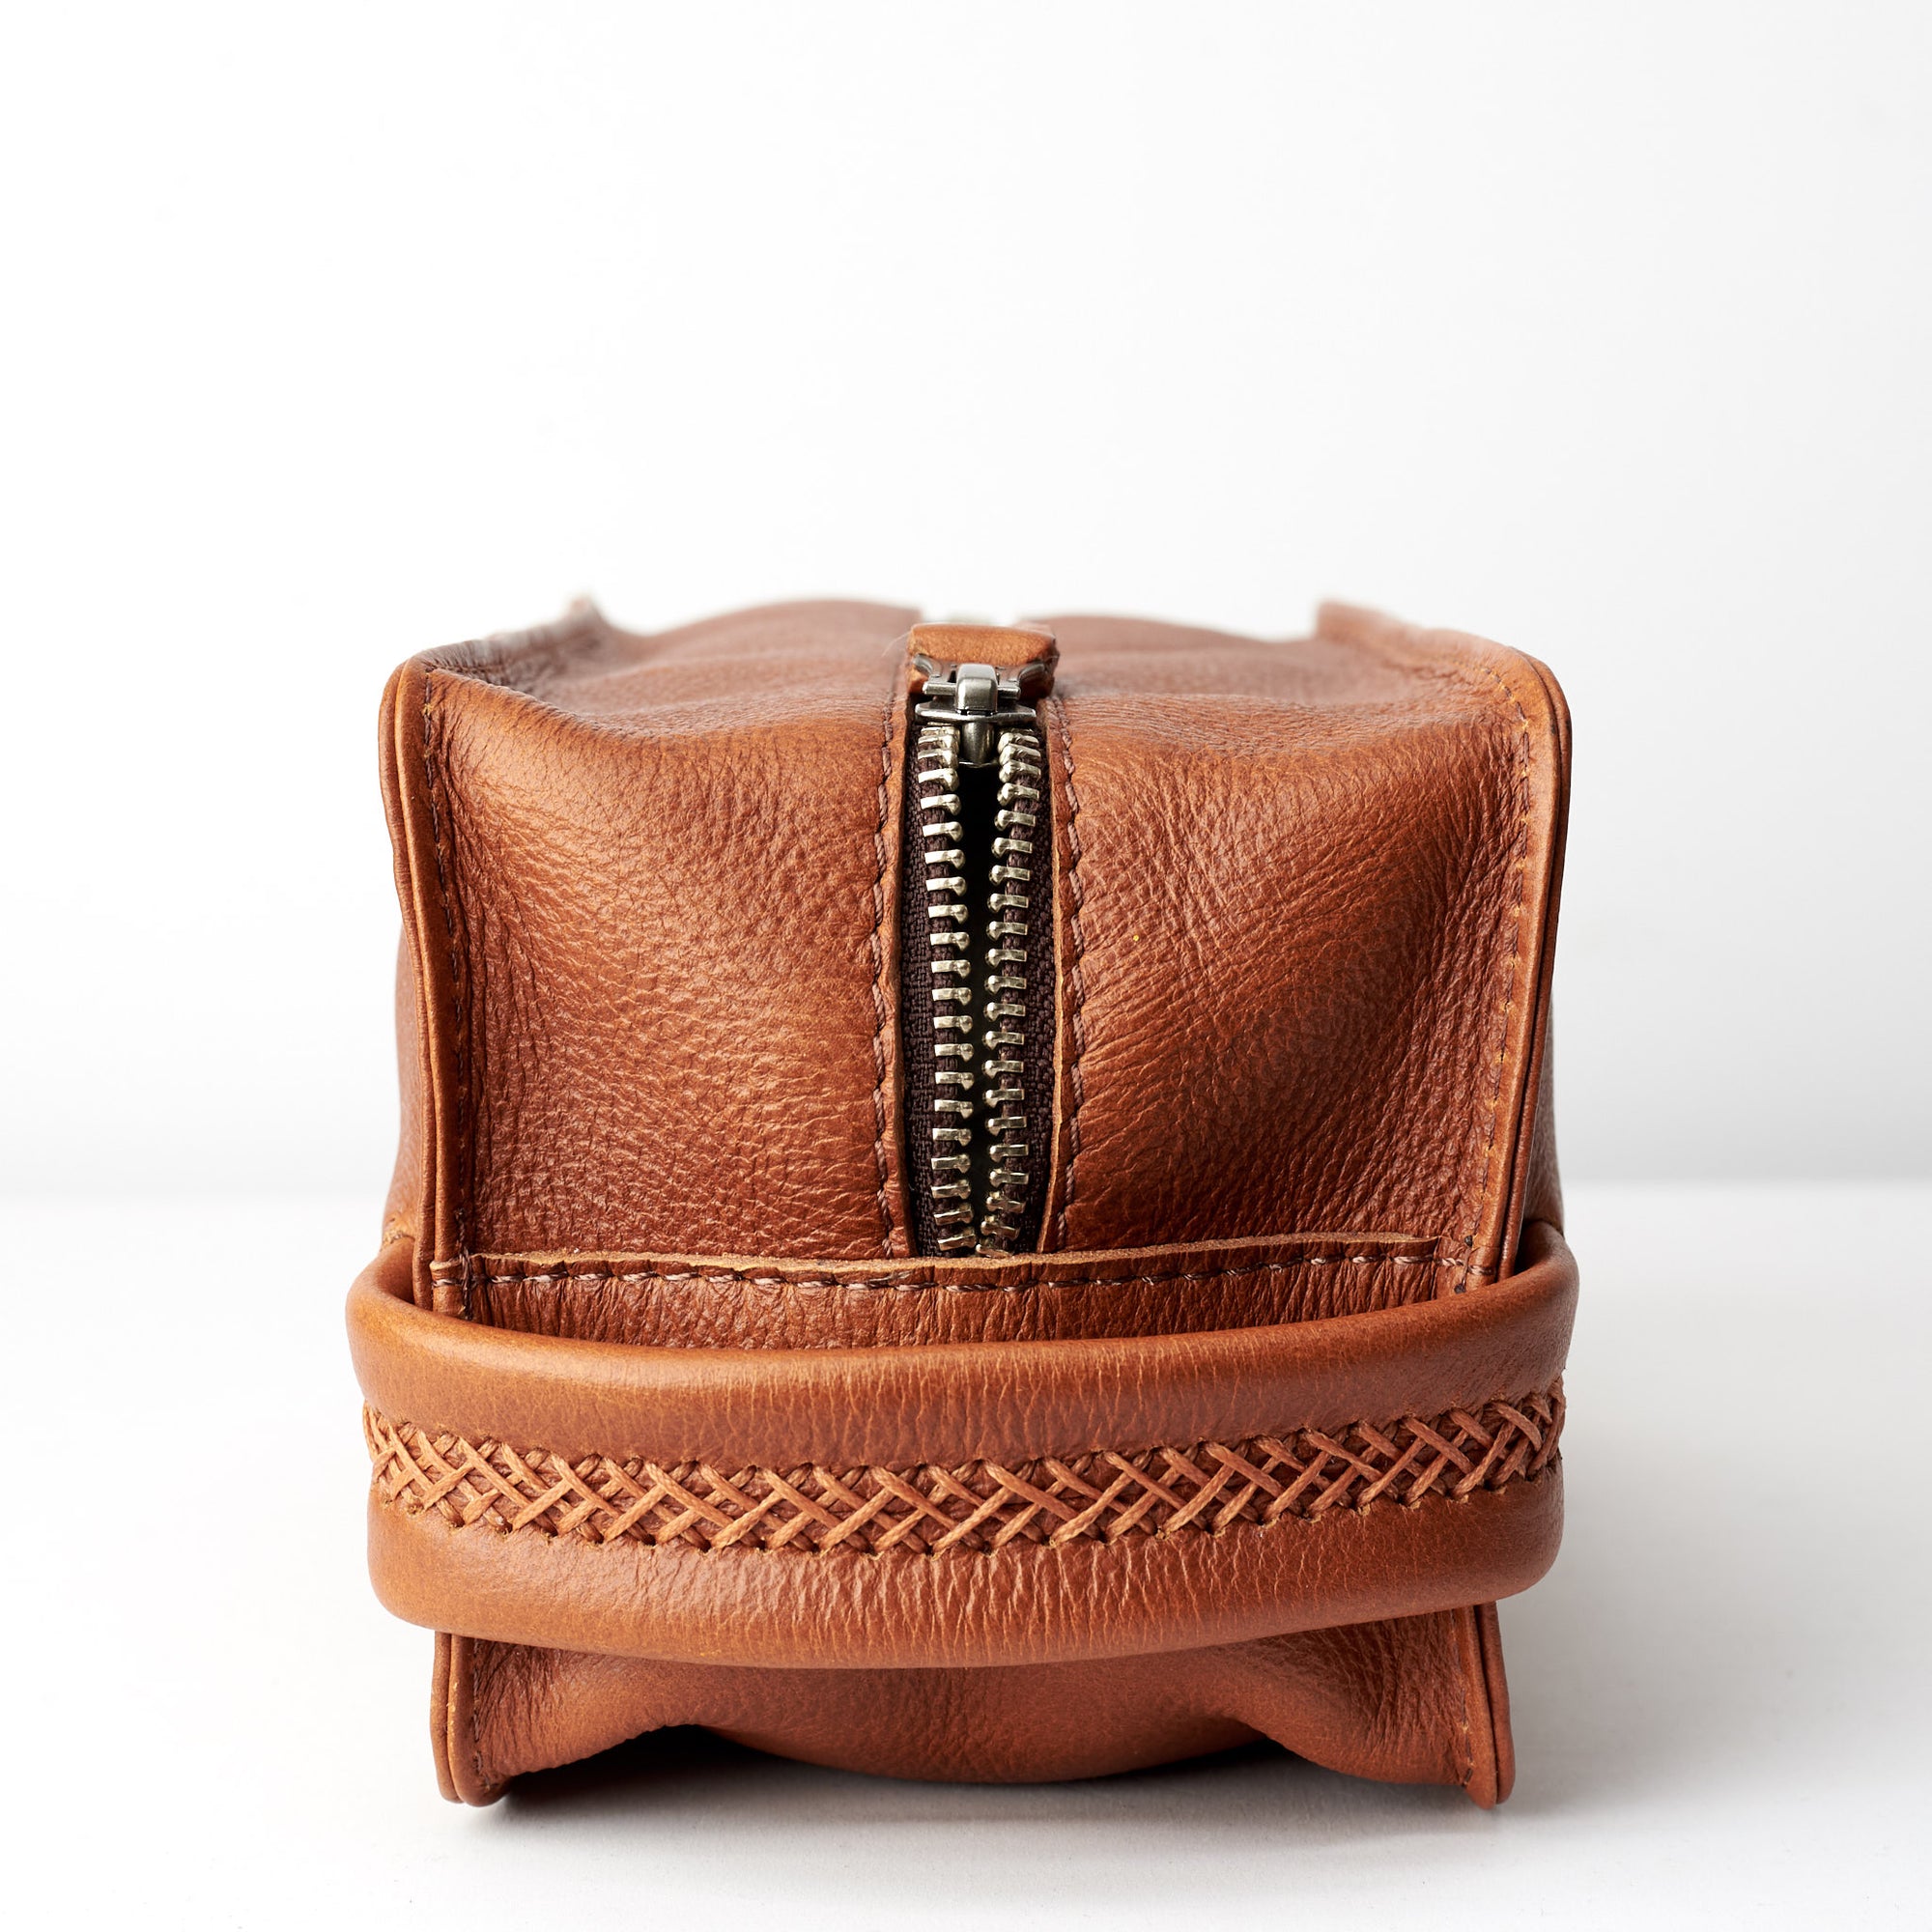 Handler. Tan leather toiletry, shaving bag with hand stitched handle. Groomsmen gifts. Leather good crafted by Capra Leather 